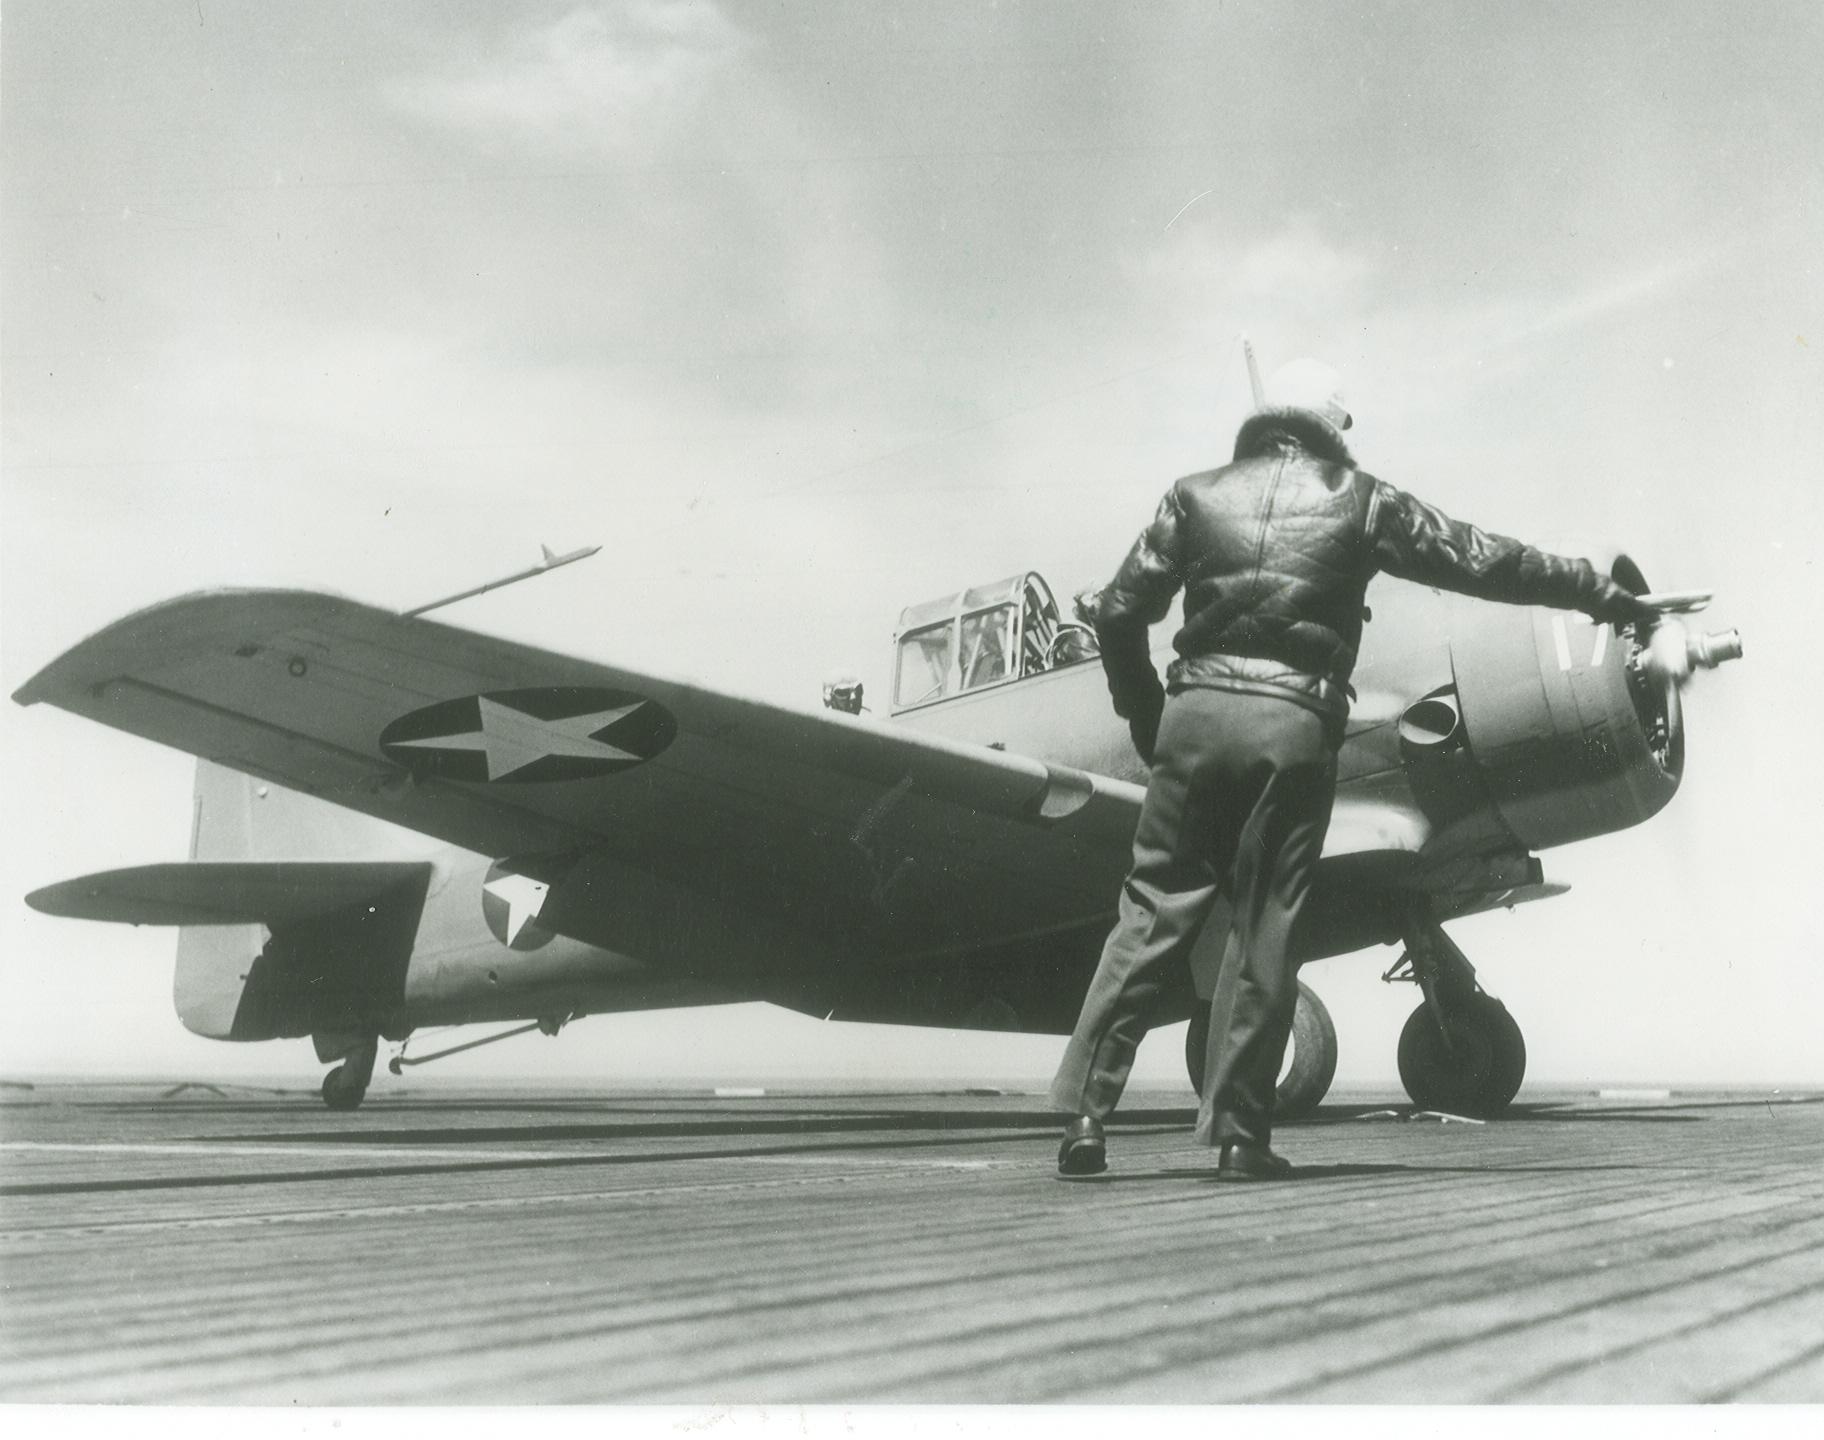 The Deck Officer gives an SNJ-3C Texan the go-ahead to launch from the training aircraft carrier USS Wolverine on Lake Michigan, United States, 26 Apr 1943.